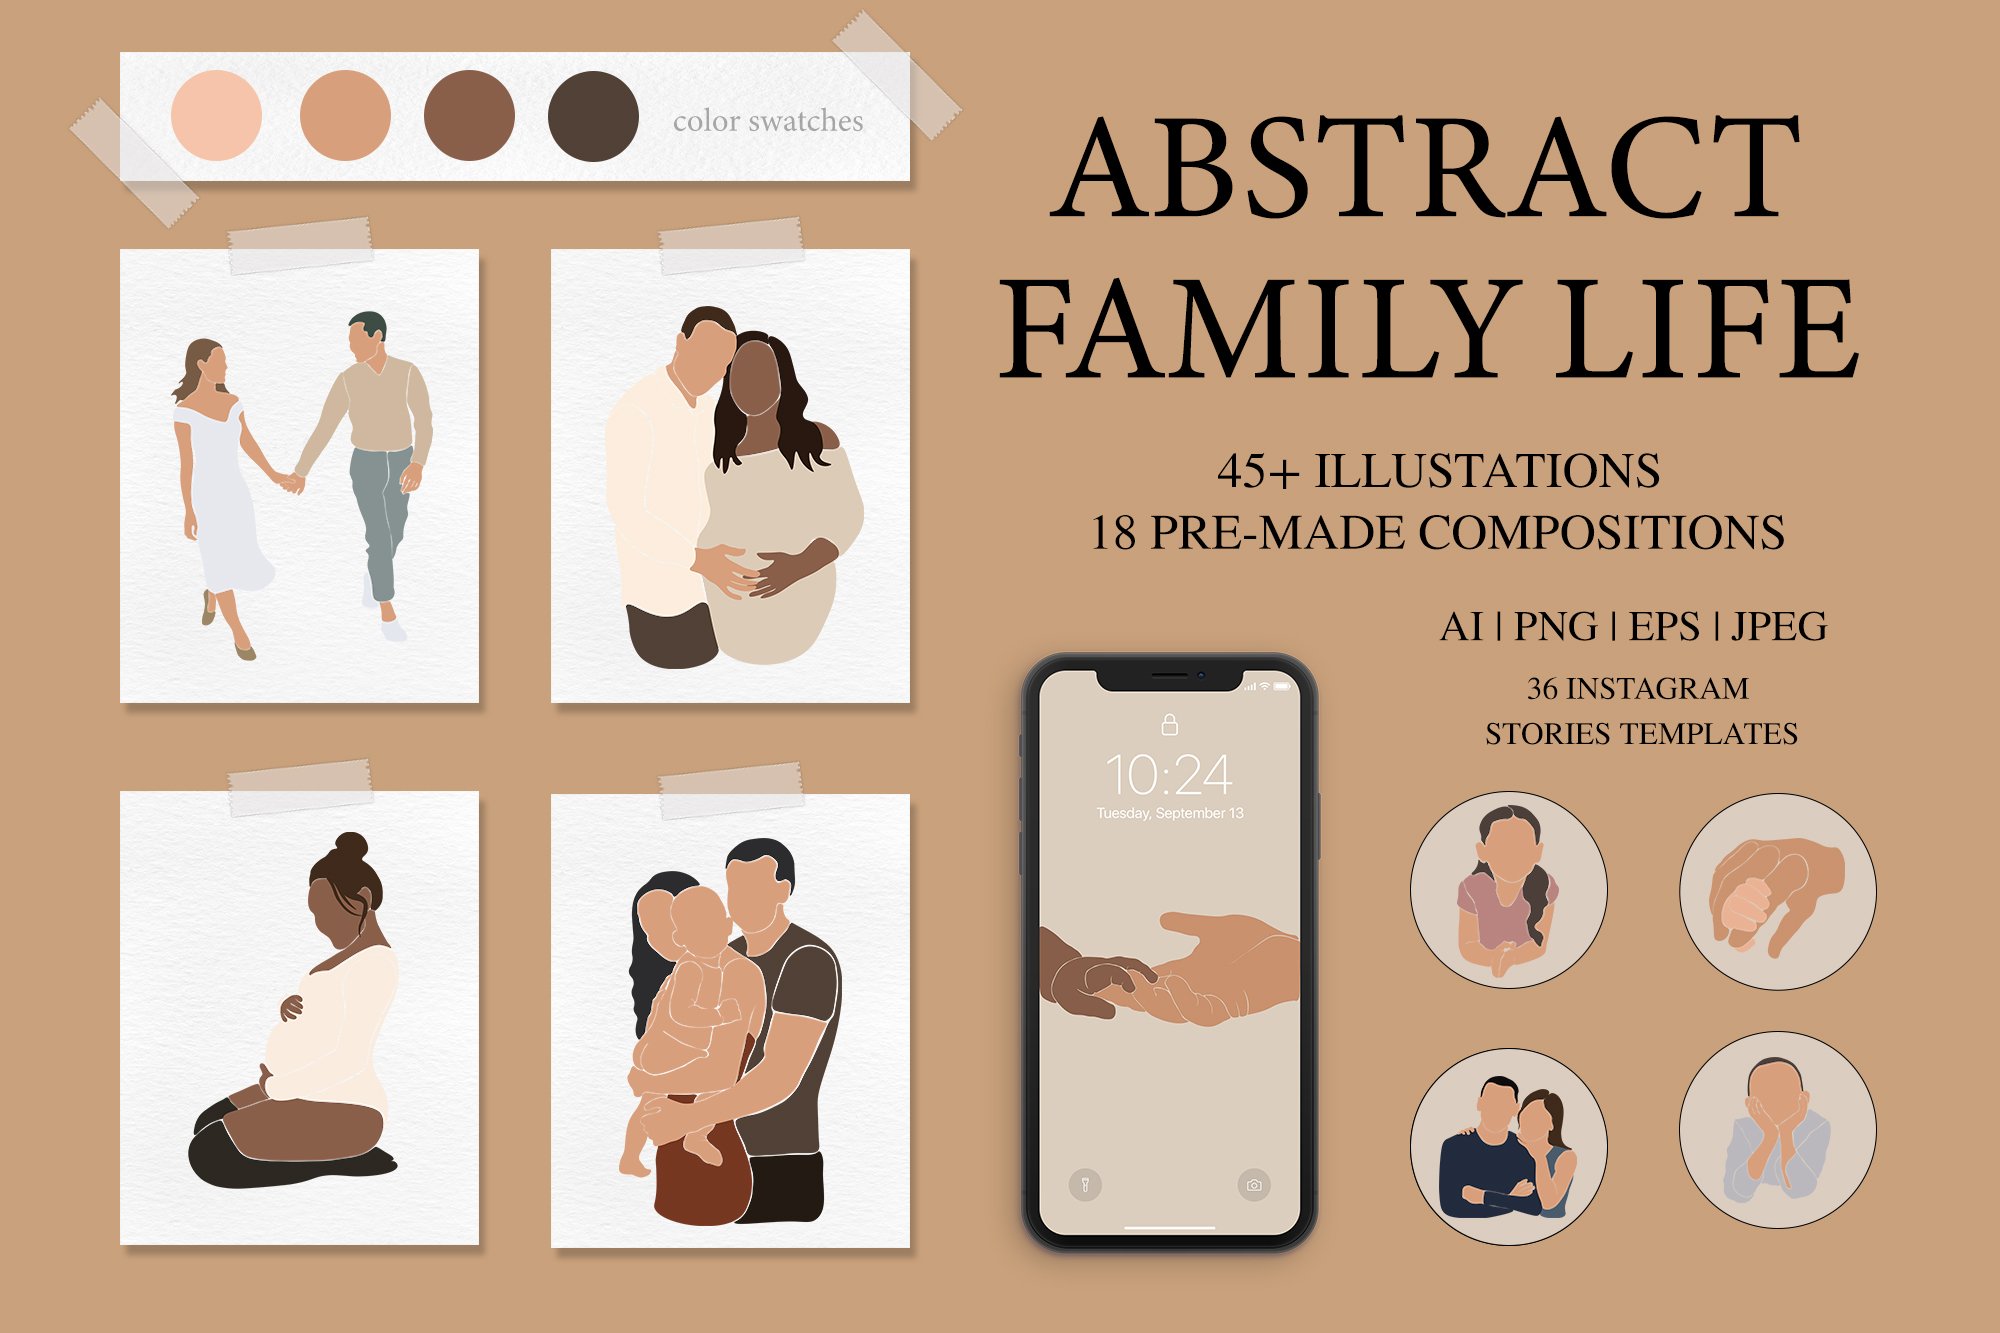 ABSTRACT FAMILY LIFE cover image.